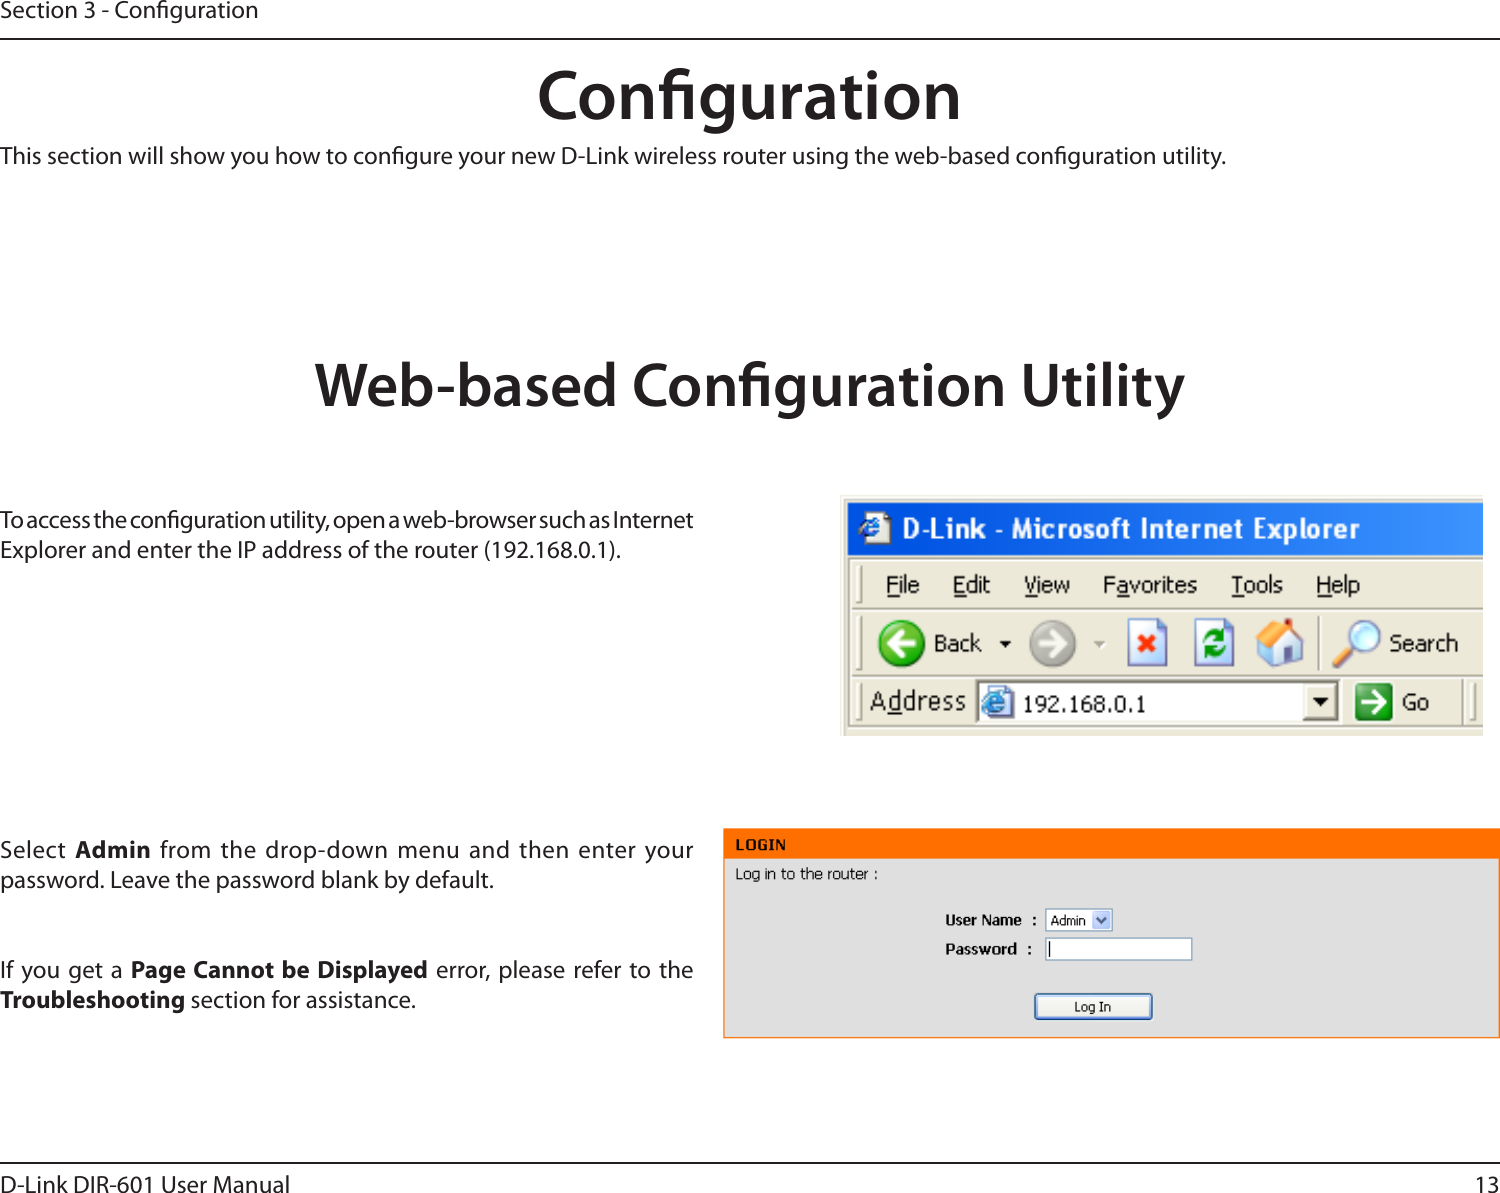 13D-Link DIR-601 User ManualSection 3 - CongurationCongurationThis section will show you how to congure your new D-Link wireless router using the web-based conguration utility.Web-based Conguration UtilityTo access the conguration utility, open a web-browser such as Internet Explorer and enter the IP address of the router (192.168.0.1).Select  Admin from the  drop-down menu and  then enter your password. Leave the password blank by default.If you get a  Page Cannot be  Displayed error, please  refer to the Troubleshooting section for assistance.